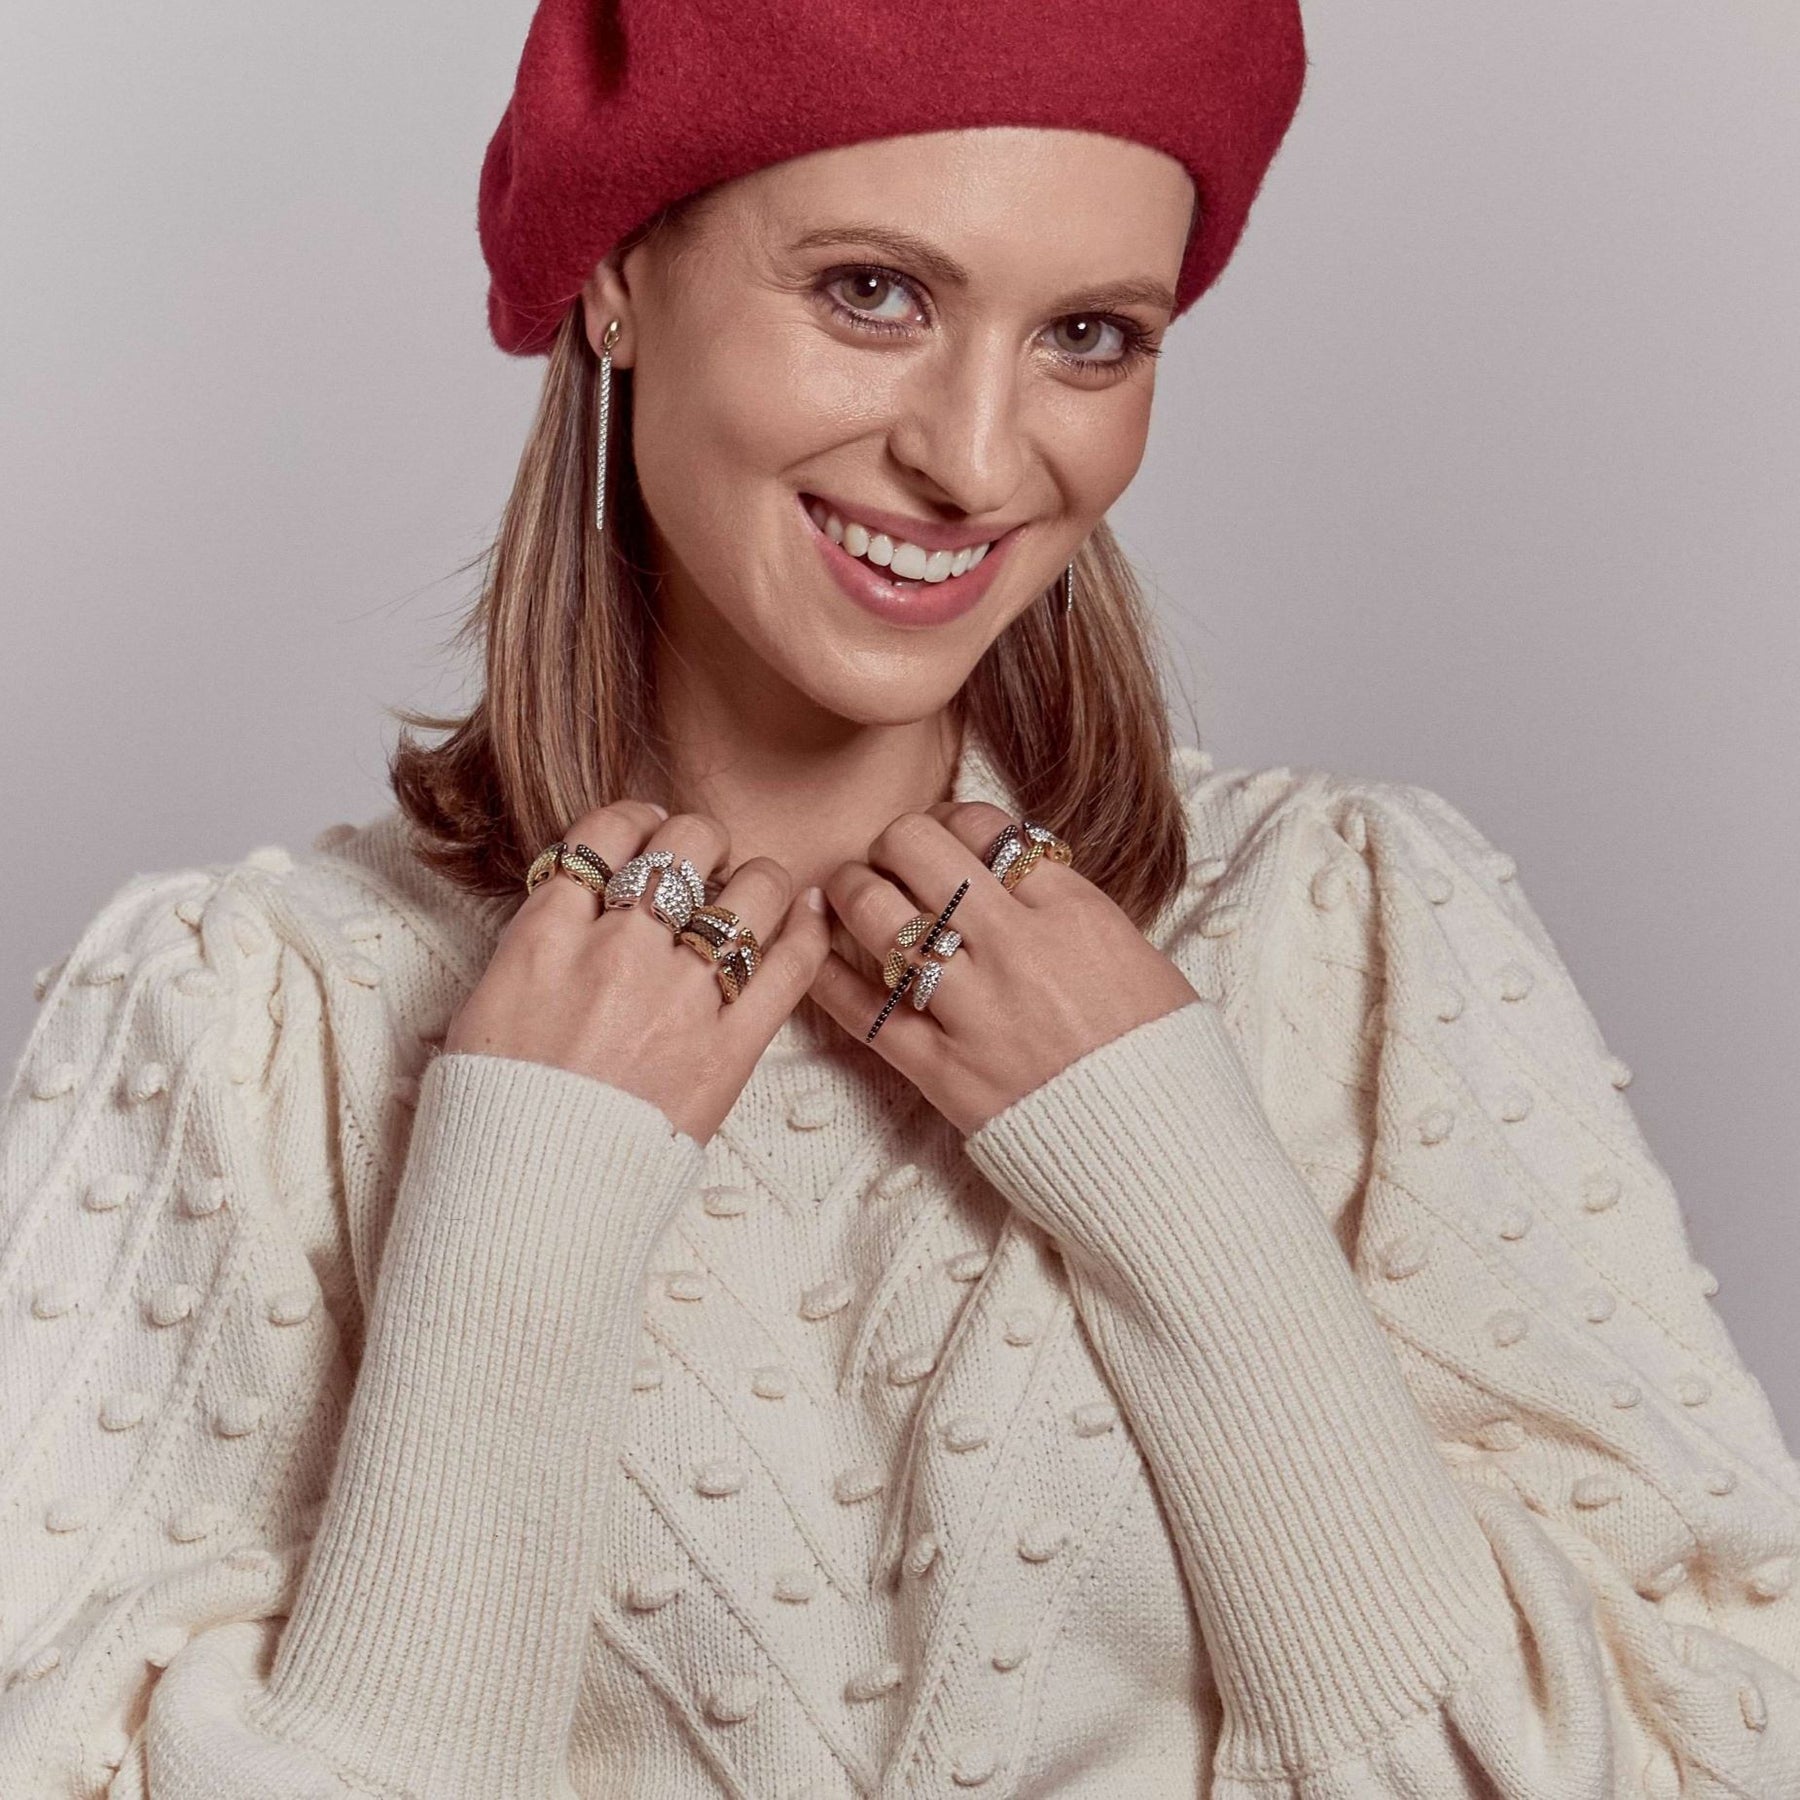 Woman in red beret and cream sweater wearing array of REALM stack rings in gold, silver, rose gold, black ruthenium and cubic zirconia.